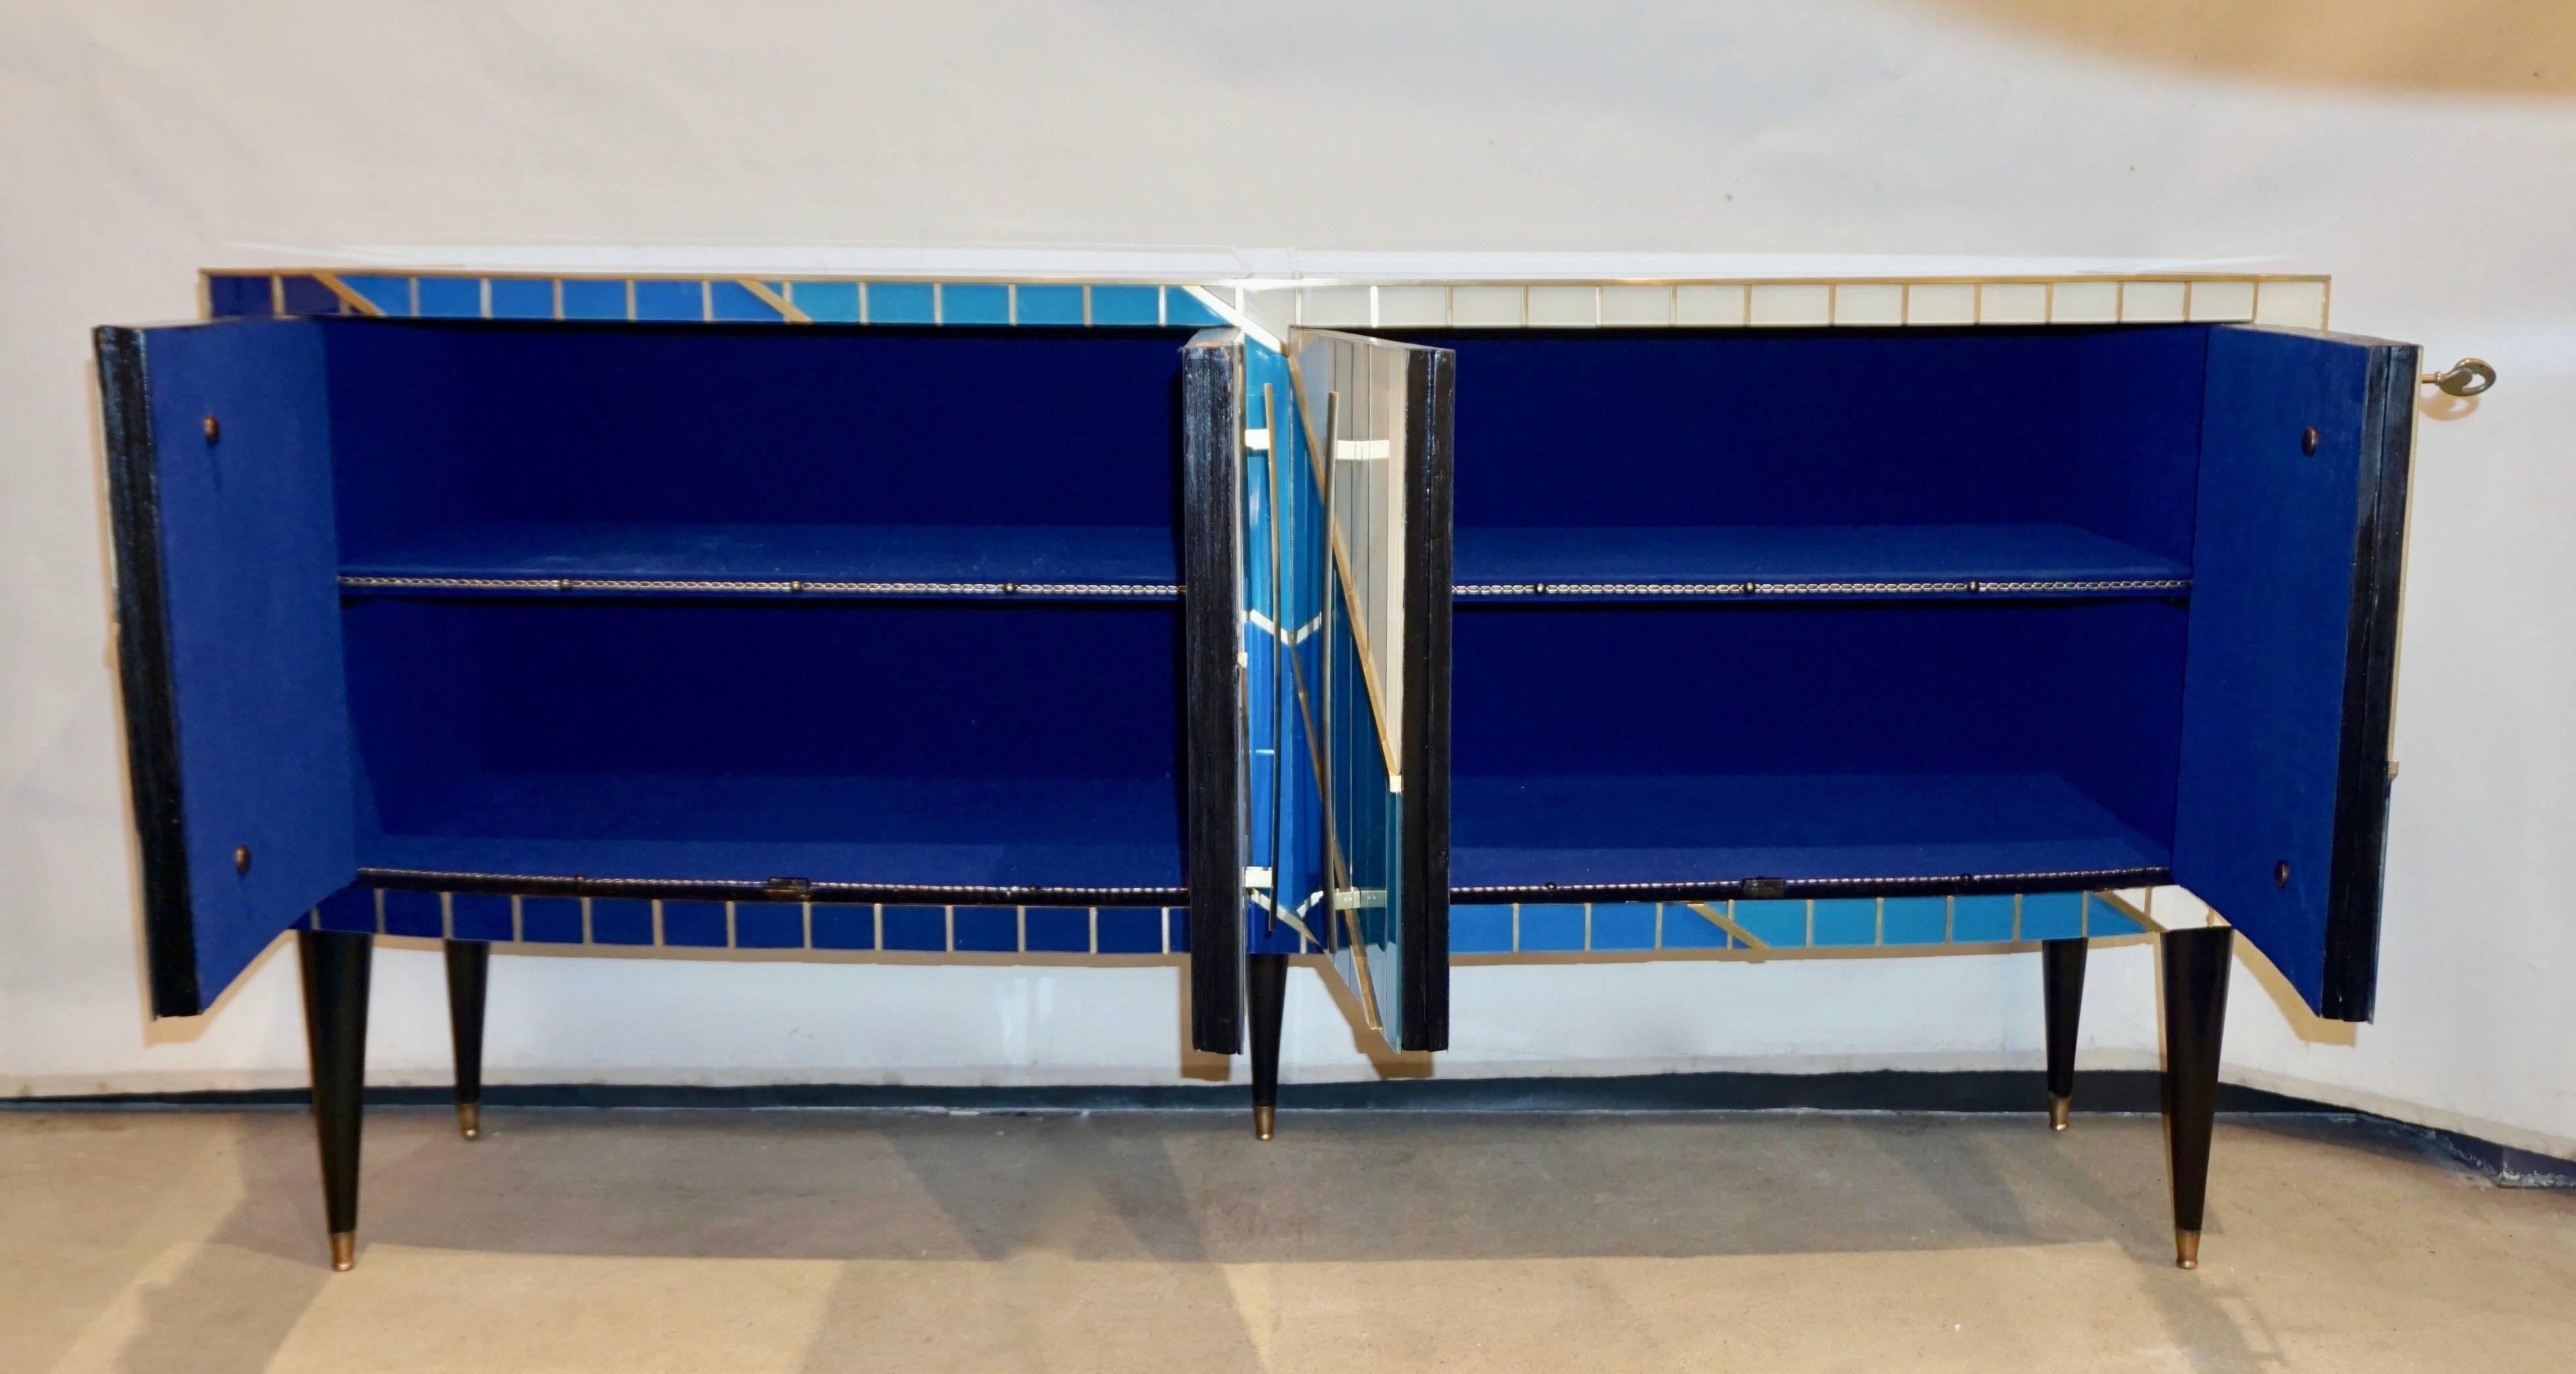 Hand-Crafted 1990s Italian Modern Brass and Glass Bowed Sideboard in Blue and Cream White